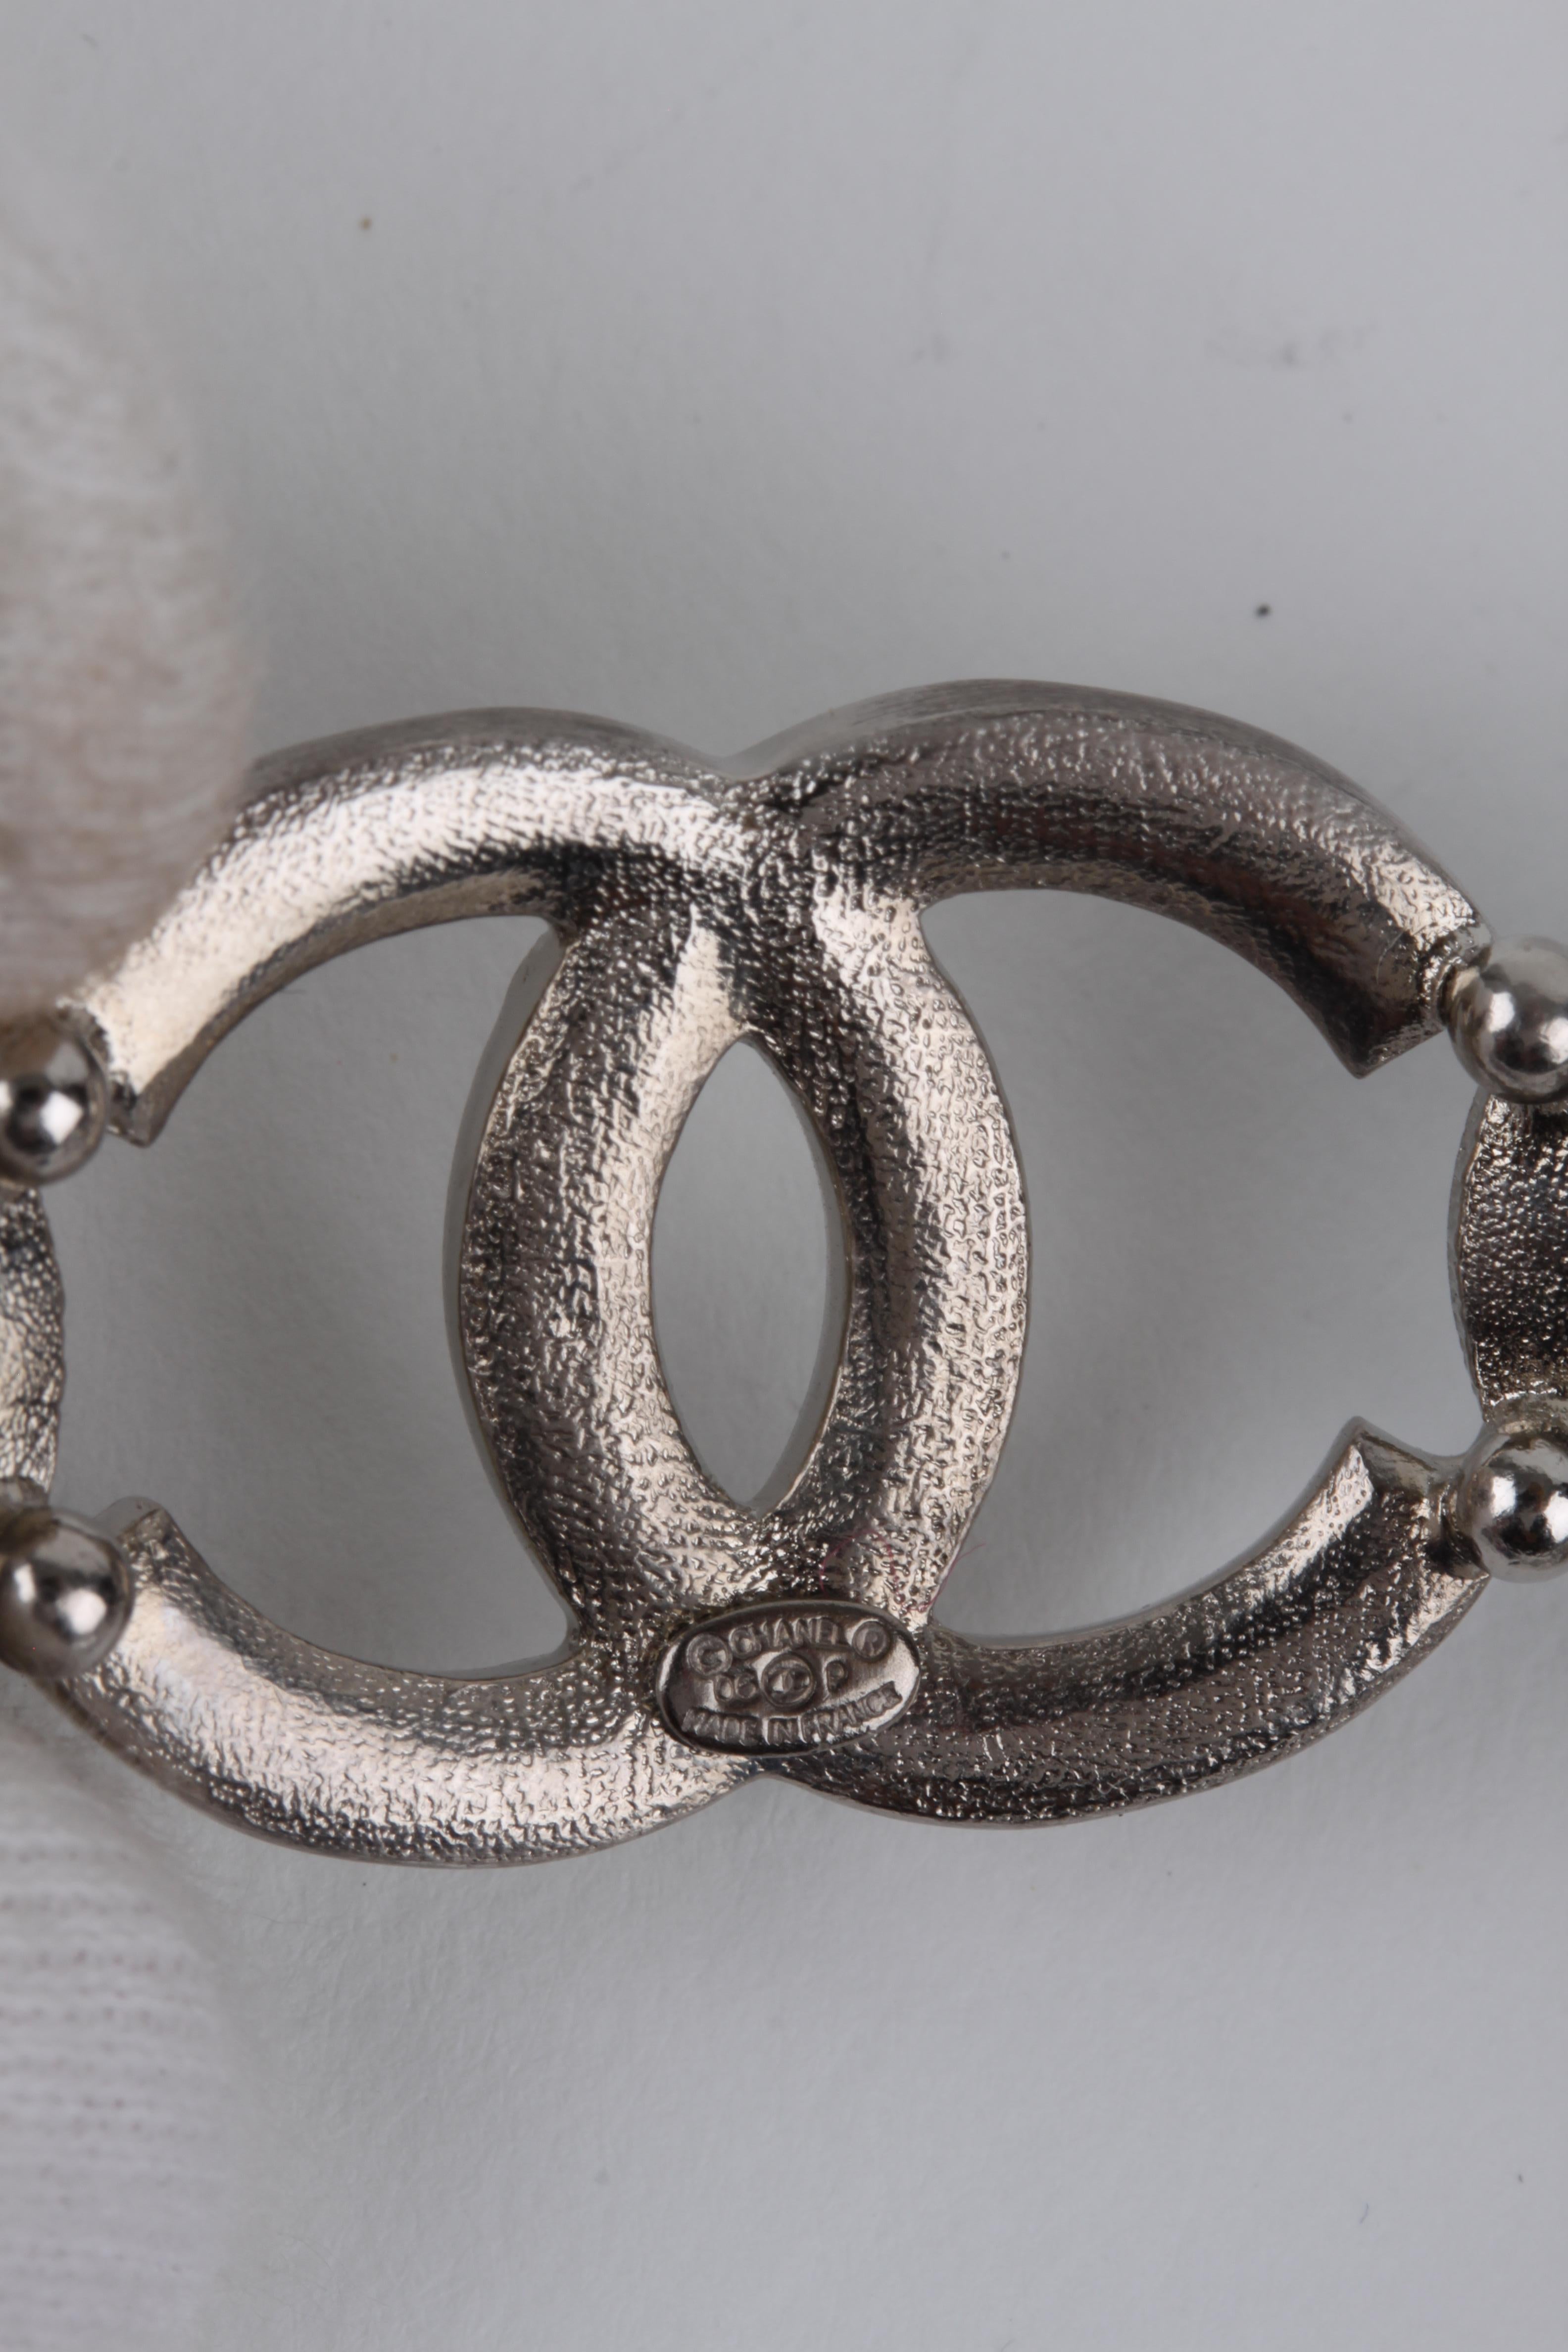 Chanel Chain Belt Beads - silver/purple/grey In Excellent Condition For Sale In Baarn, NL